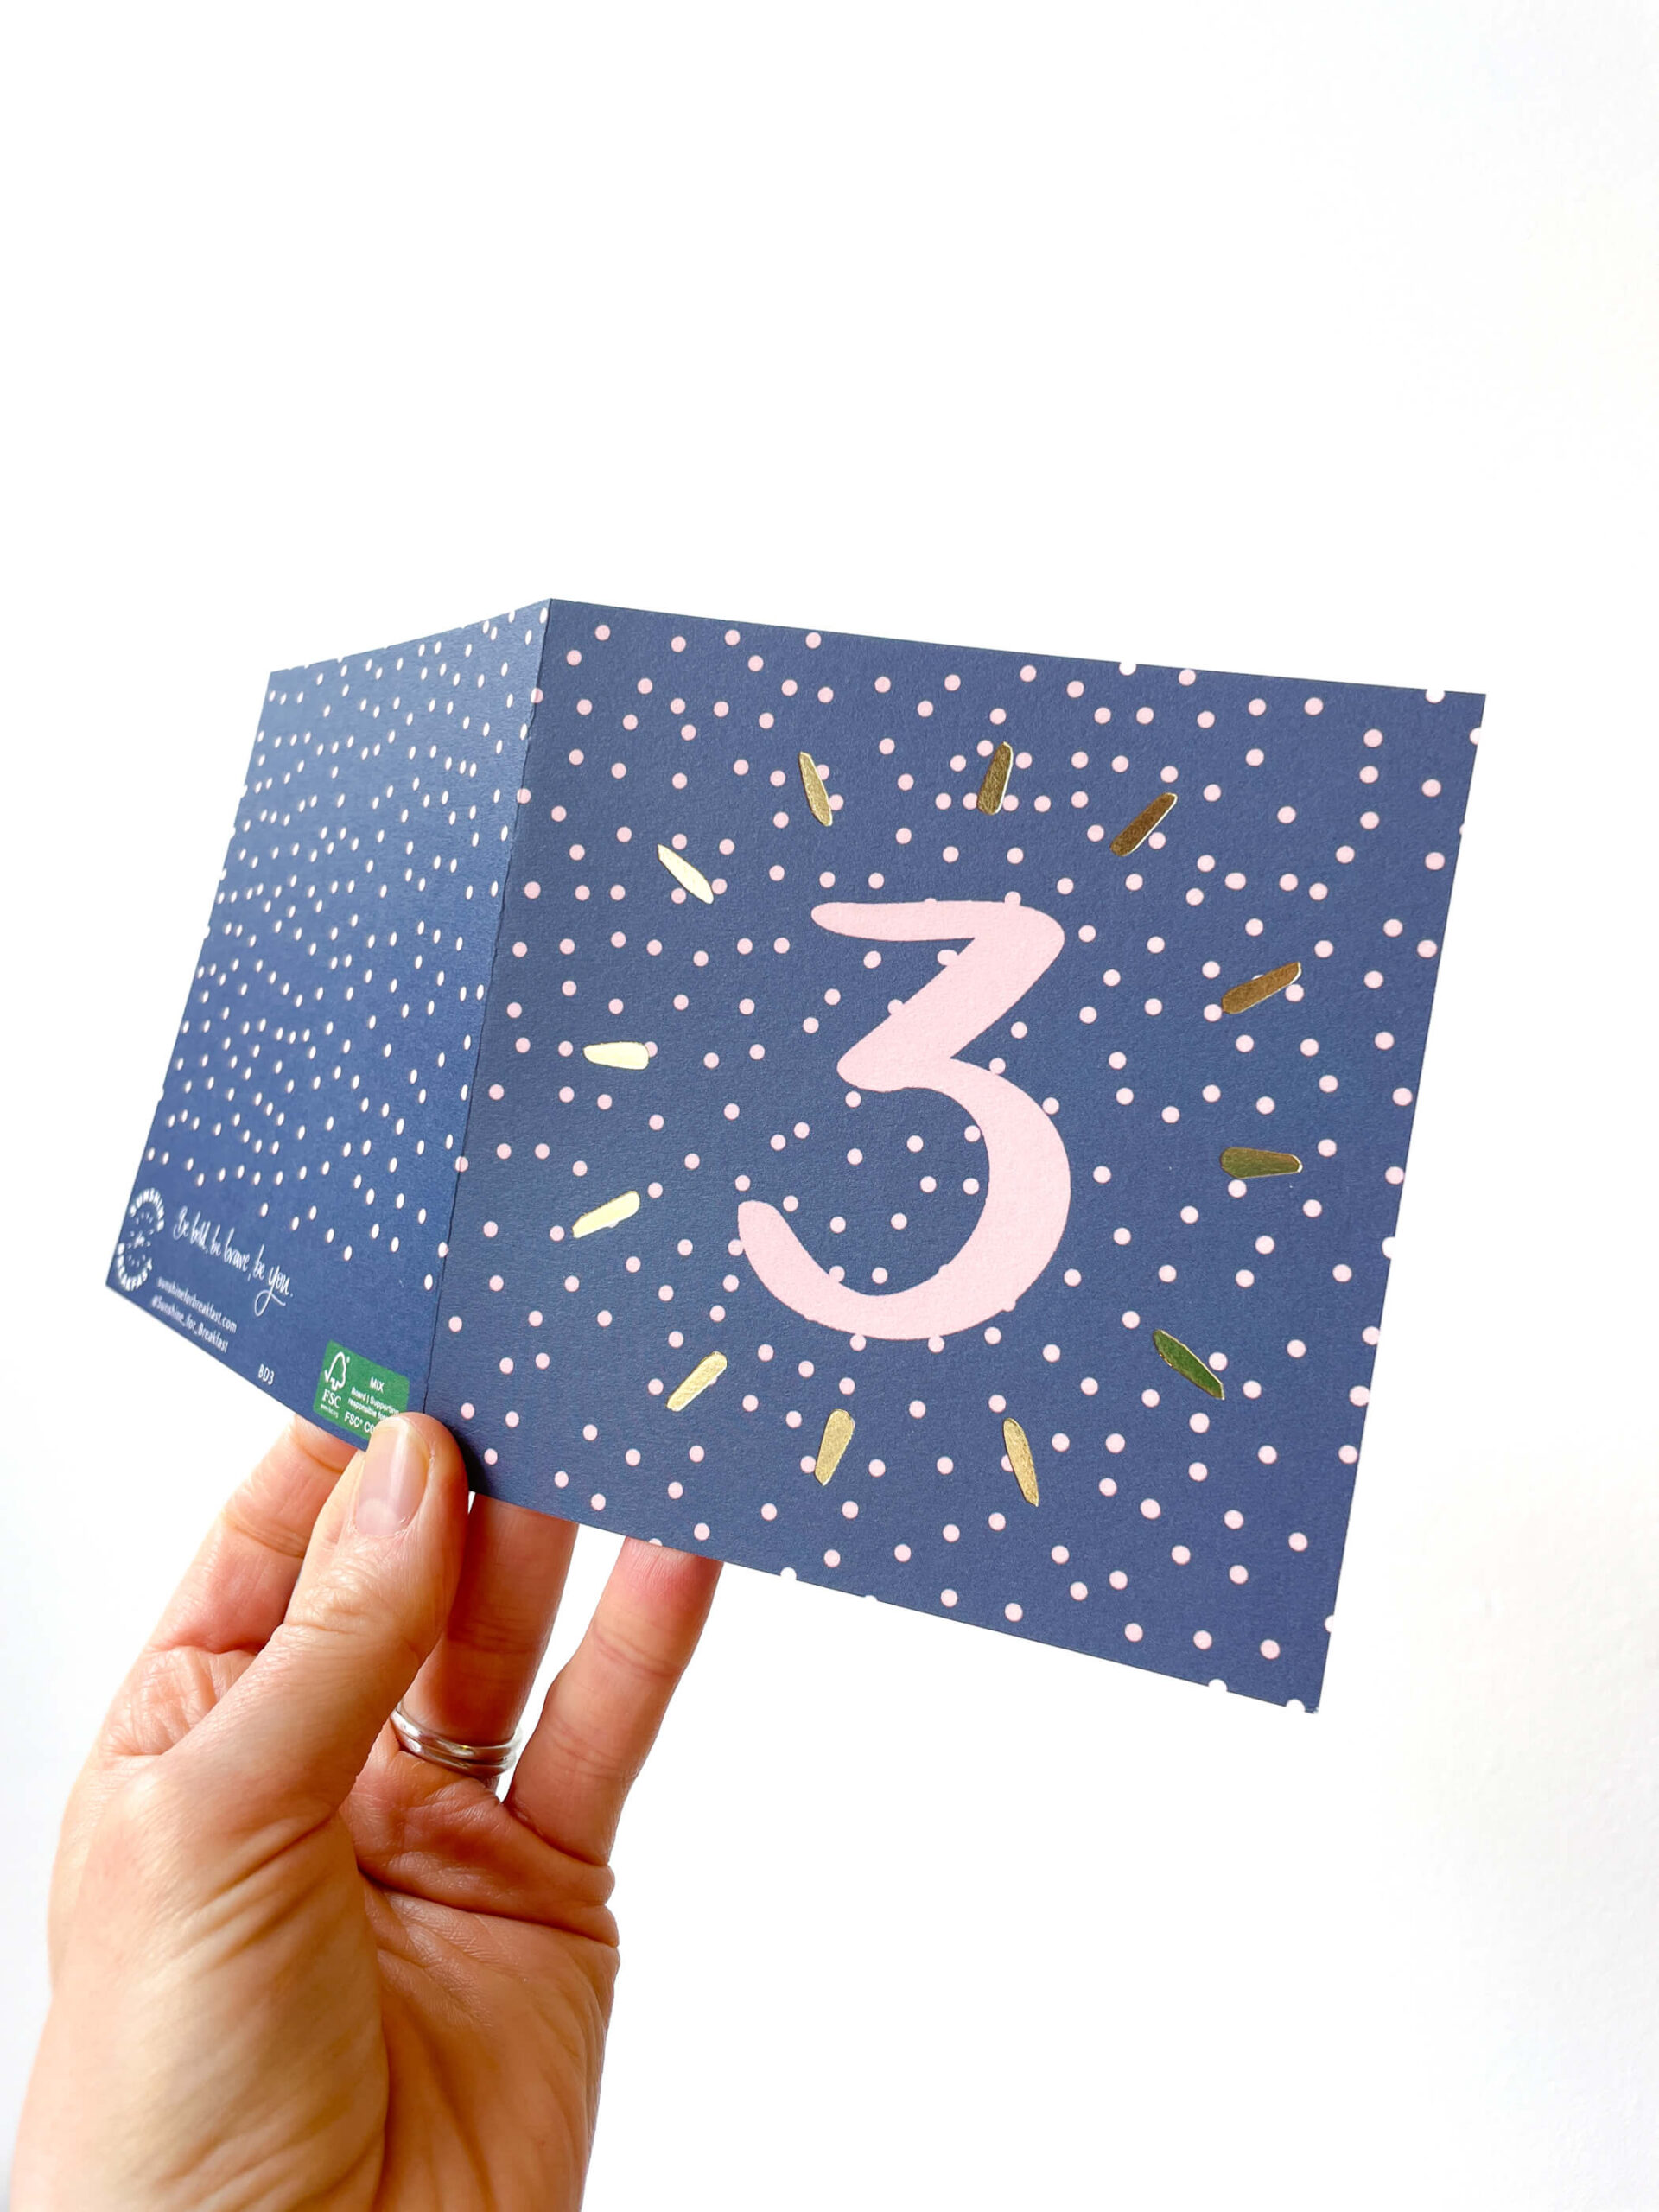 3rd birthday card in blue and pink spotty design